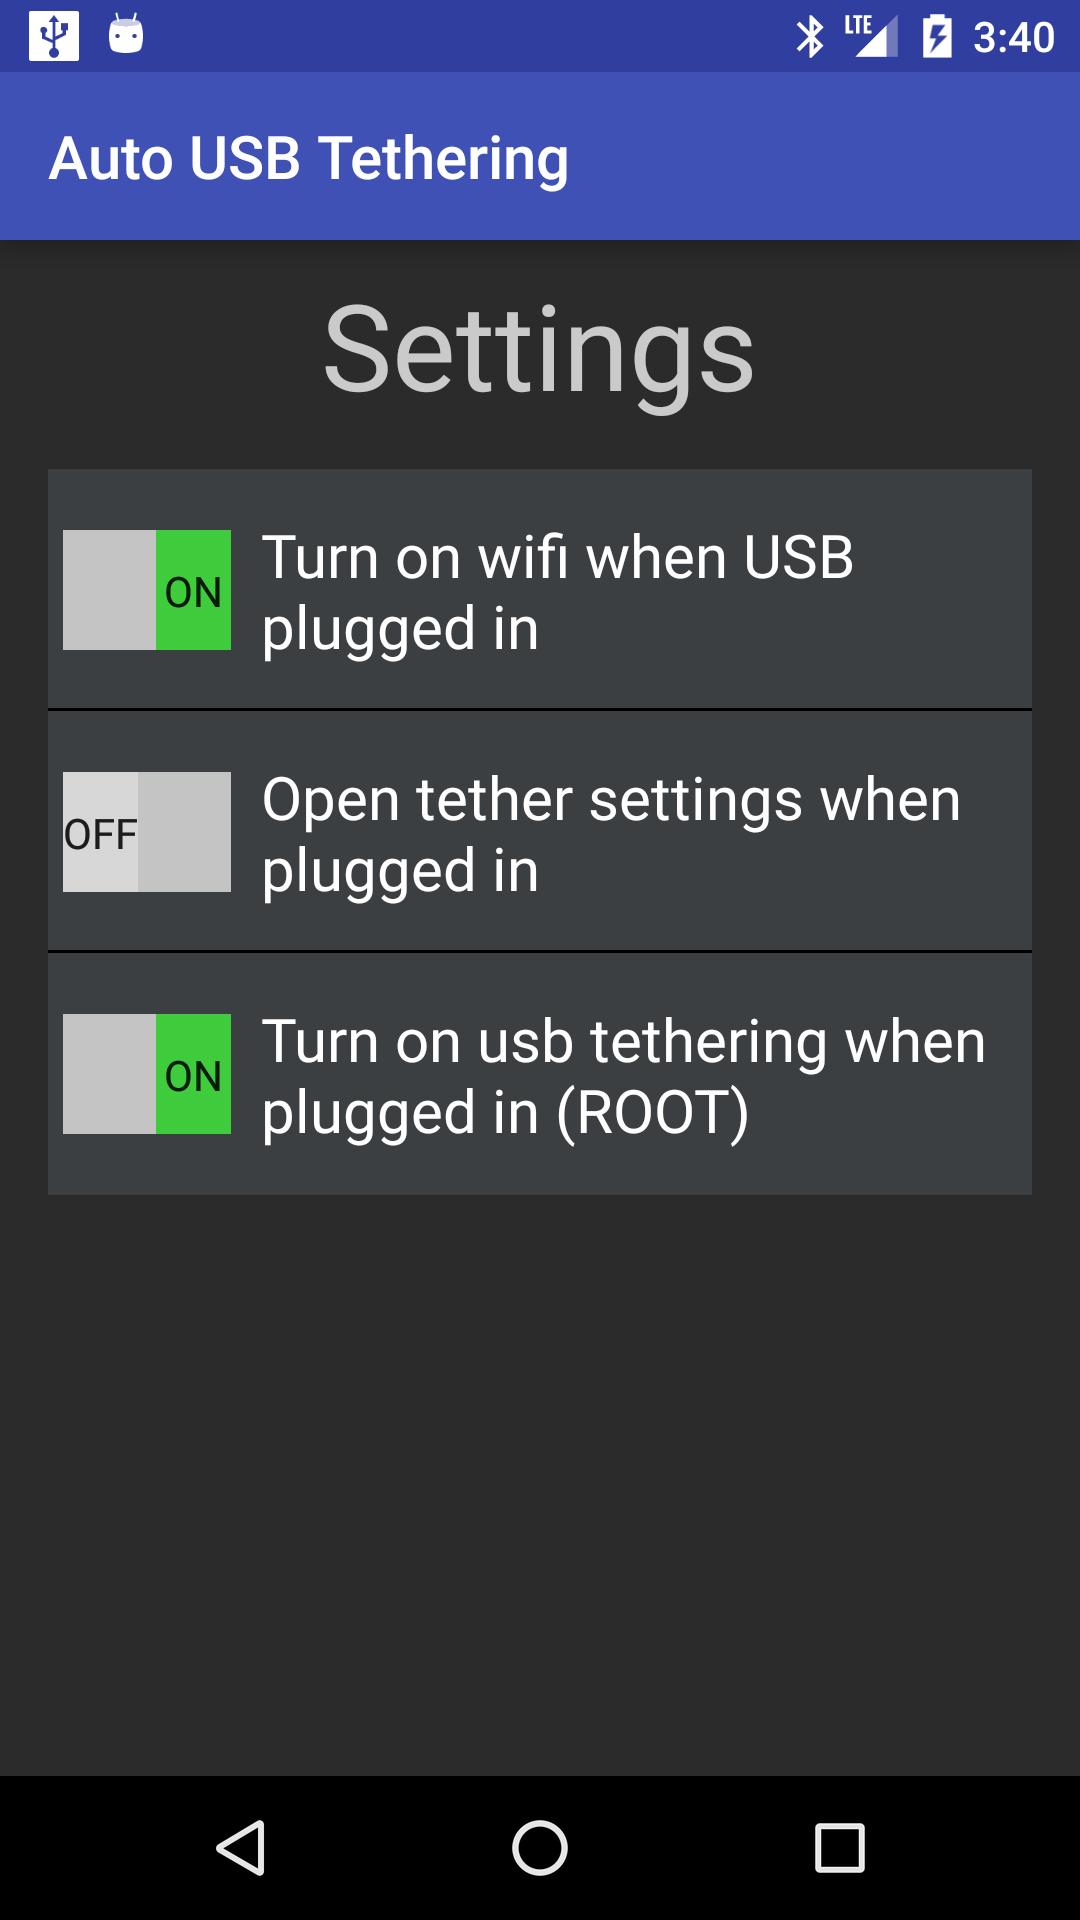 Auto USB Tethering for Android - APK Download